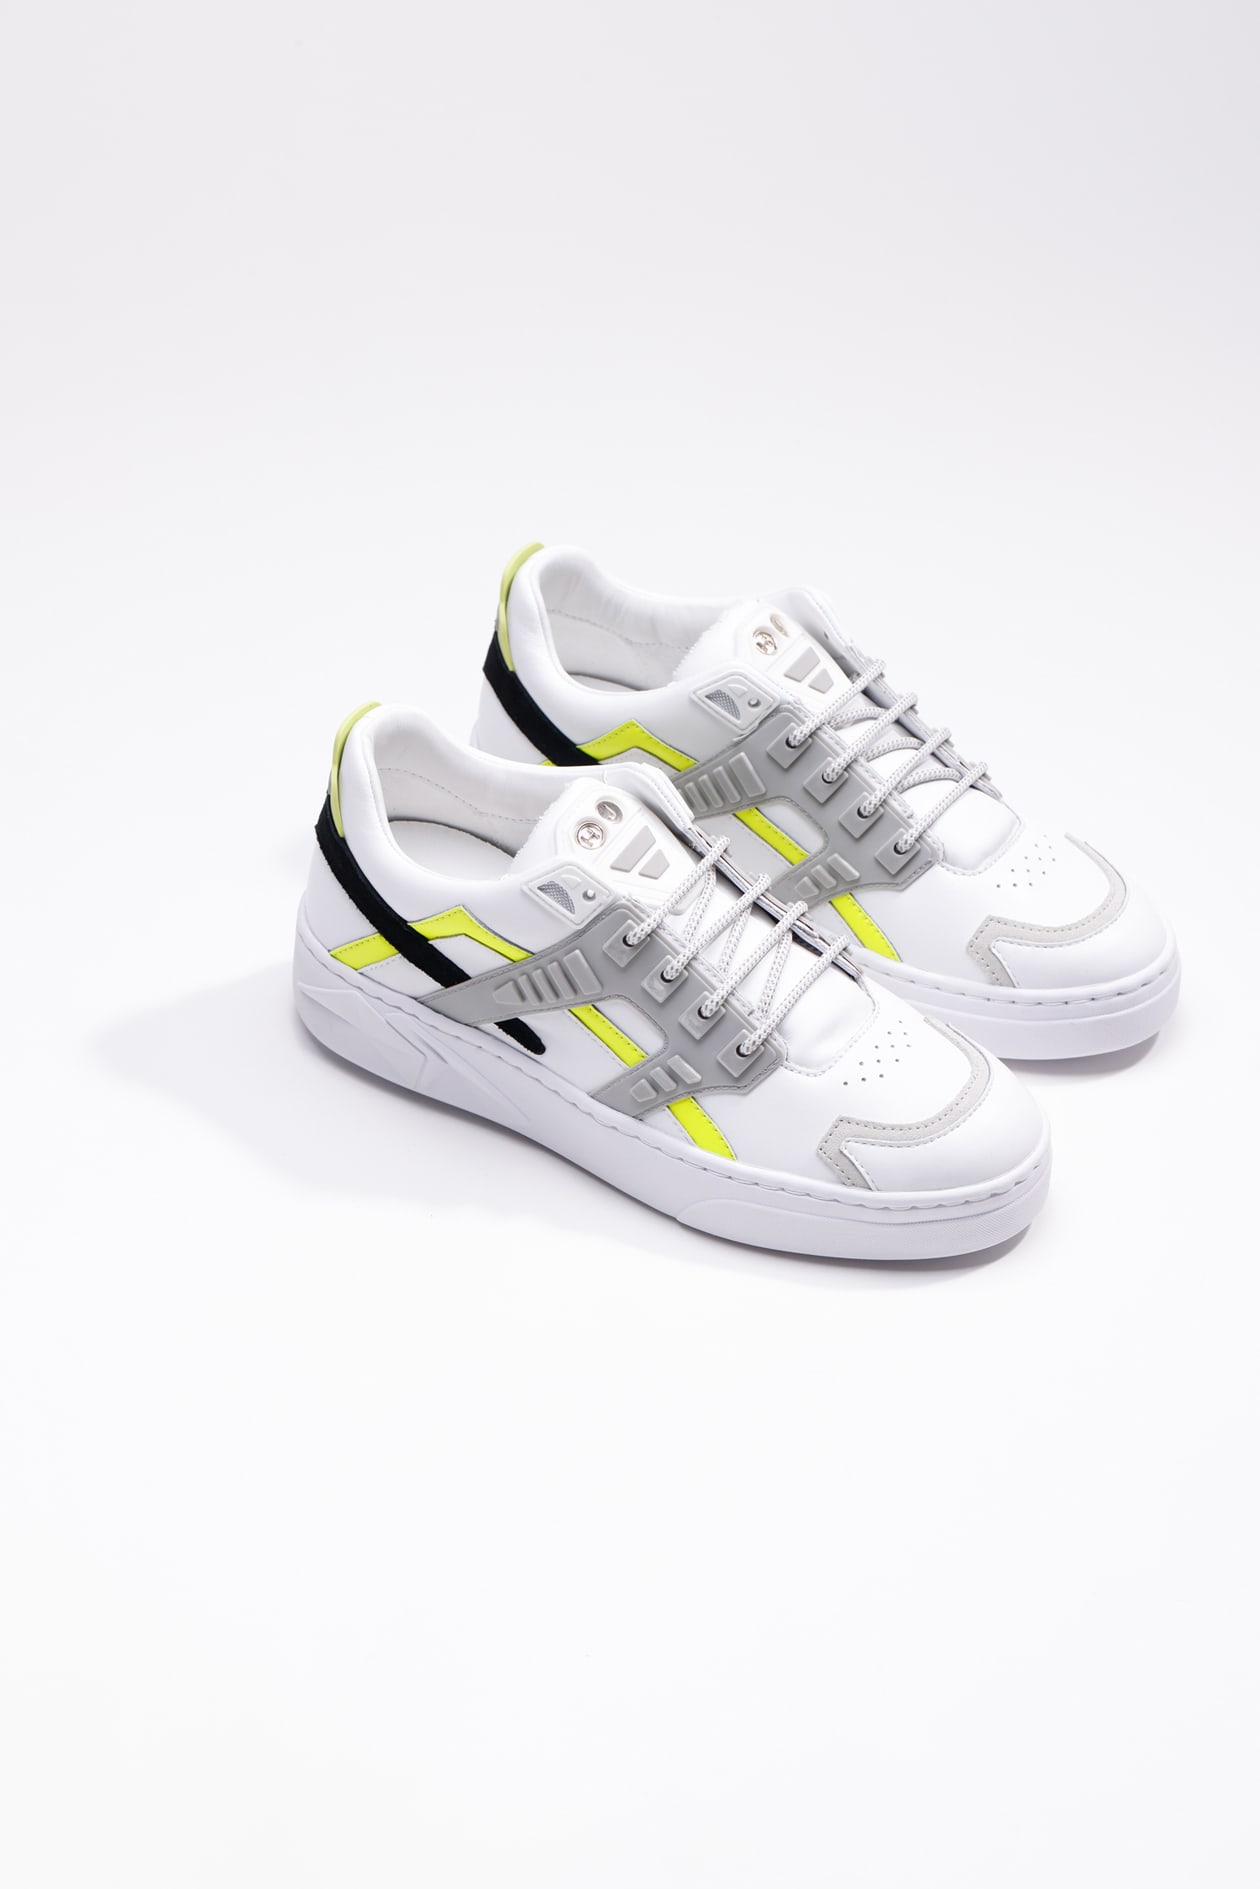 Hide&amp;jack Low Top Trainer - Mini Silverstone Yellow White